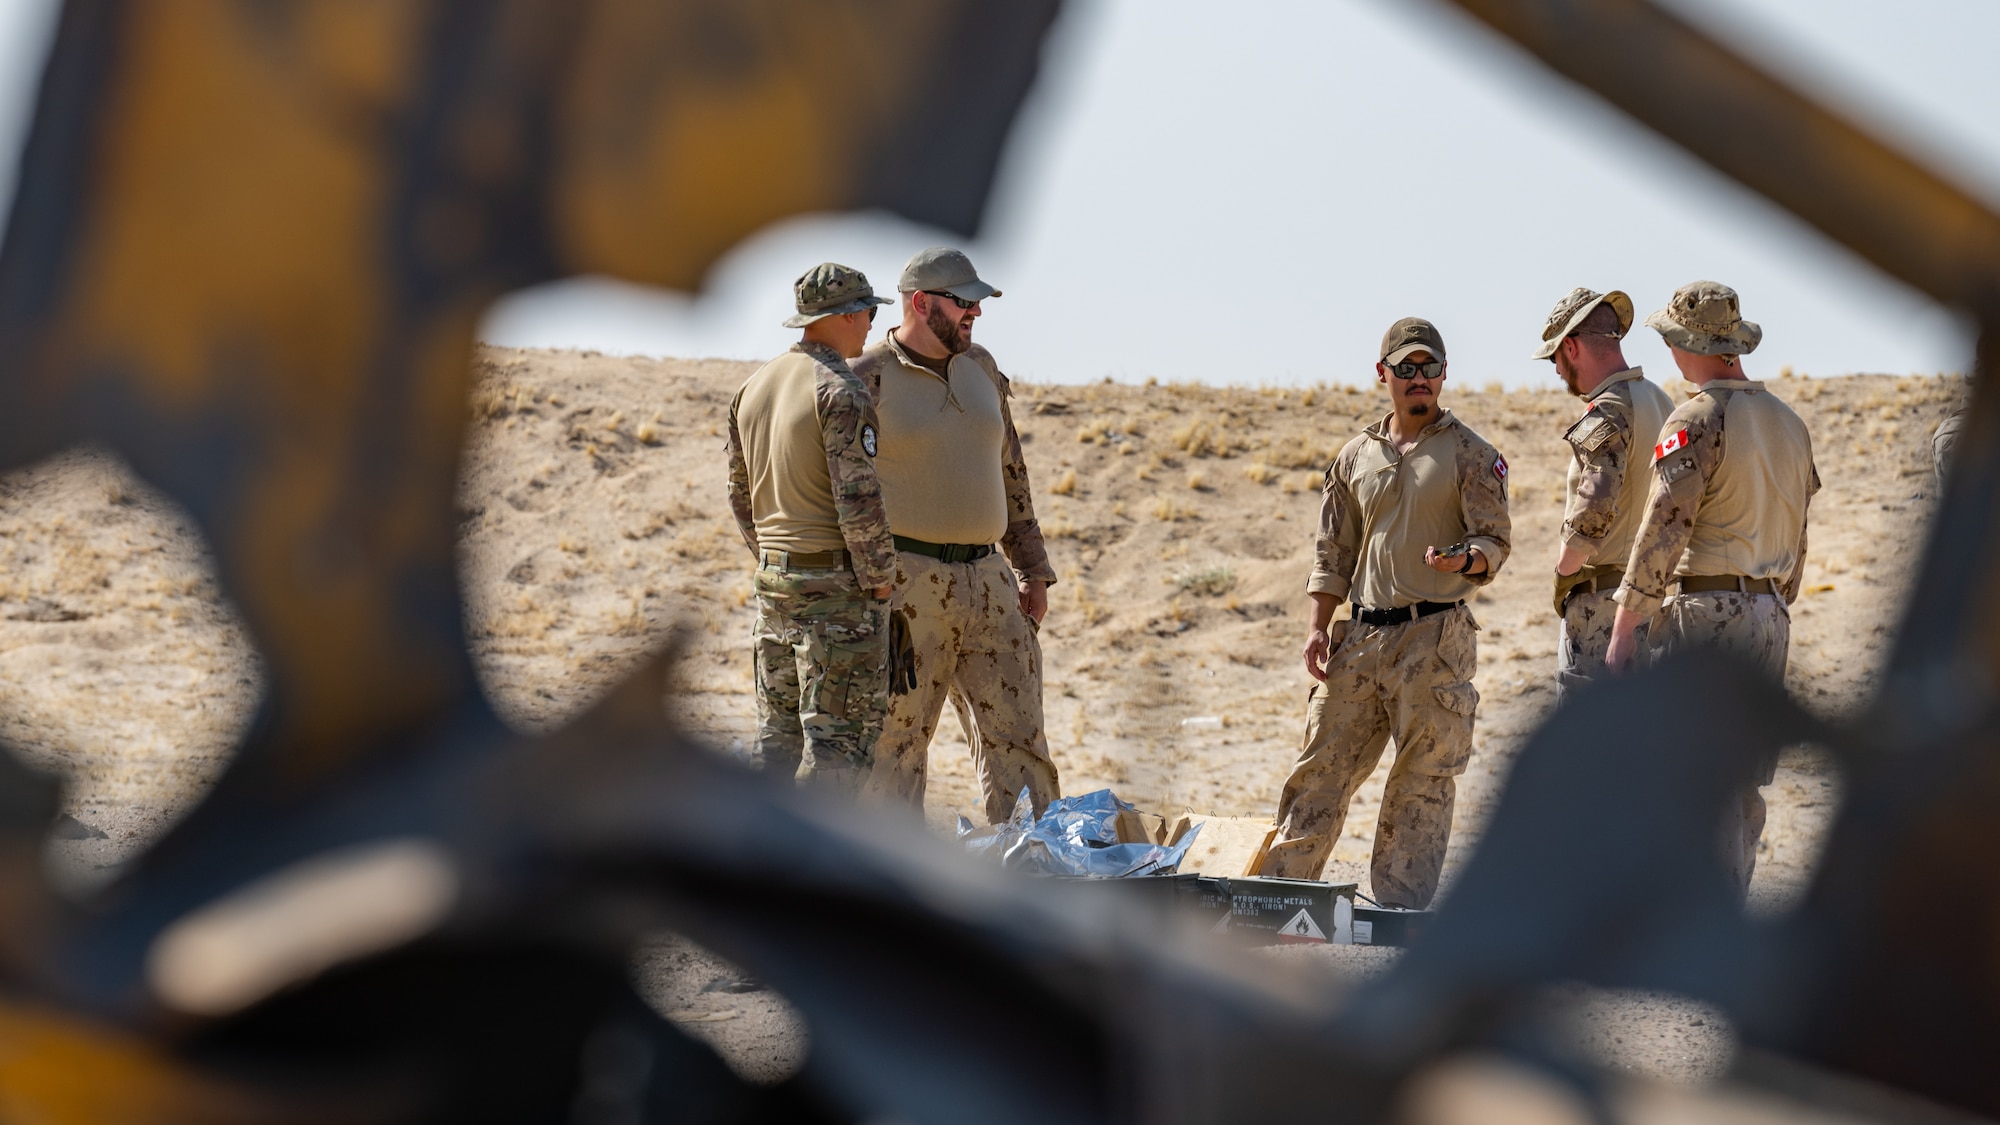 A U.S. Air Force explosive ordnance disposal (EOD) technician from the 386th Expeditionary Civil Engineer Squadron, left, talks to Canadian armed forces members about the explosives that will be used during a controlled detonation near Ali Al Salem Air Base, Kuwait, July 21, 2023. EOD technicians from the 386th ECES frequently work with our coalition partners during demolitions like this to destroy various hazardous materials in a safe and controlled environment. (U.S. Air Force photo by Staff Sgt. Kevin Long)